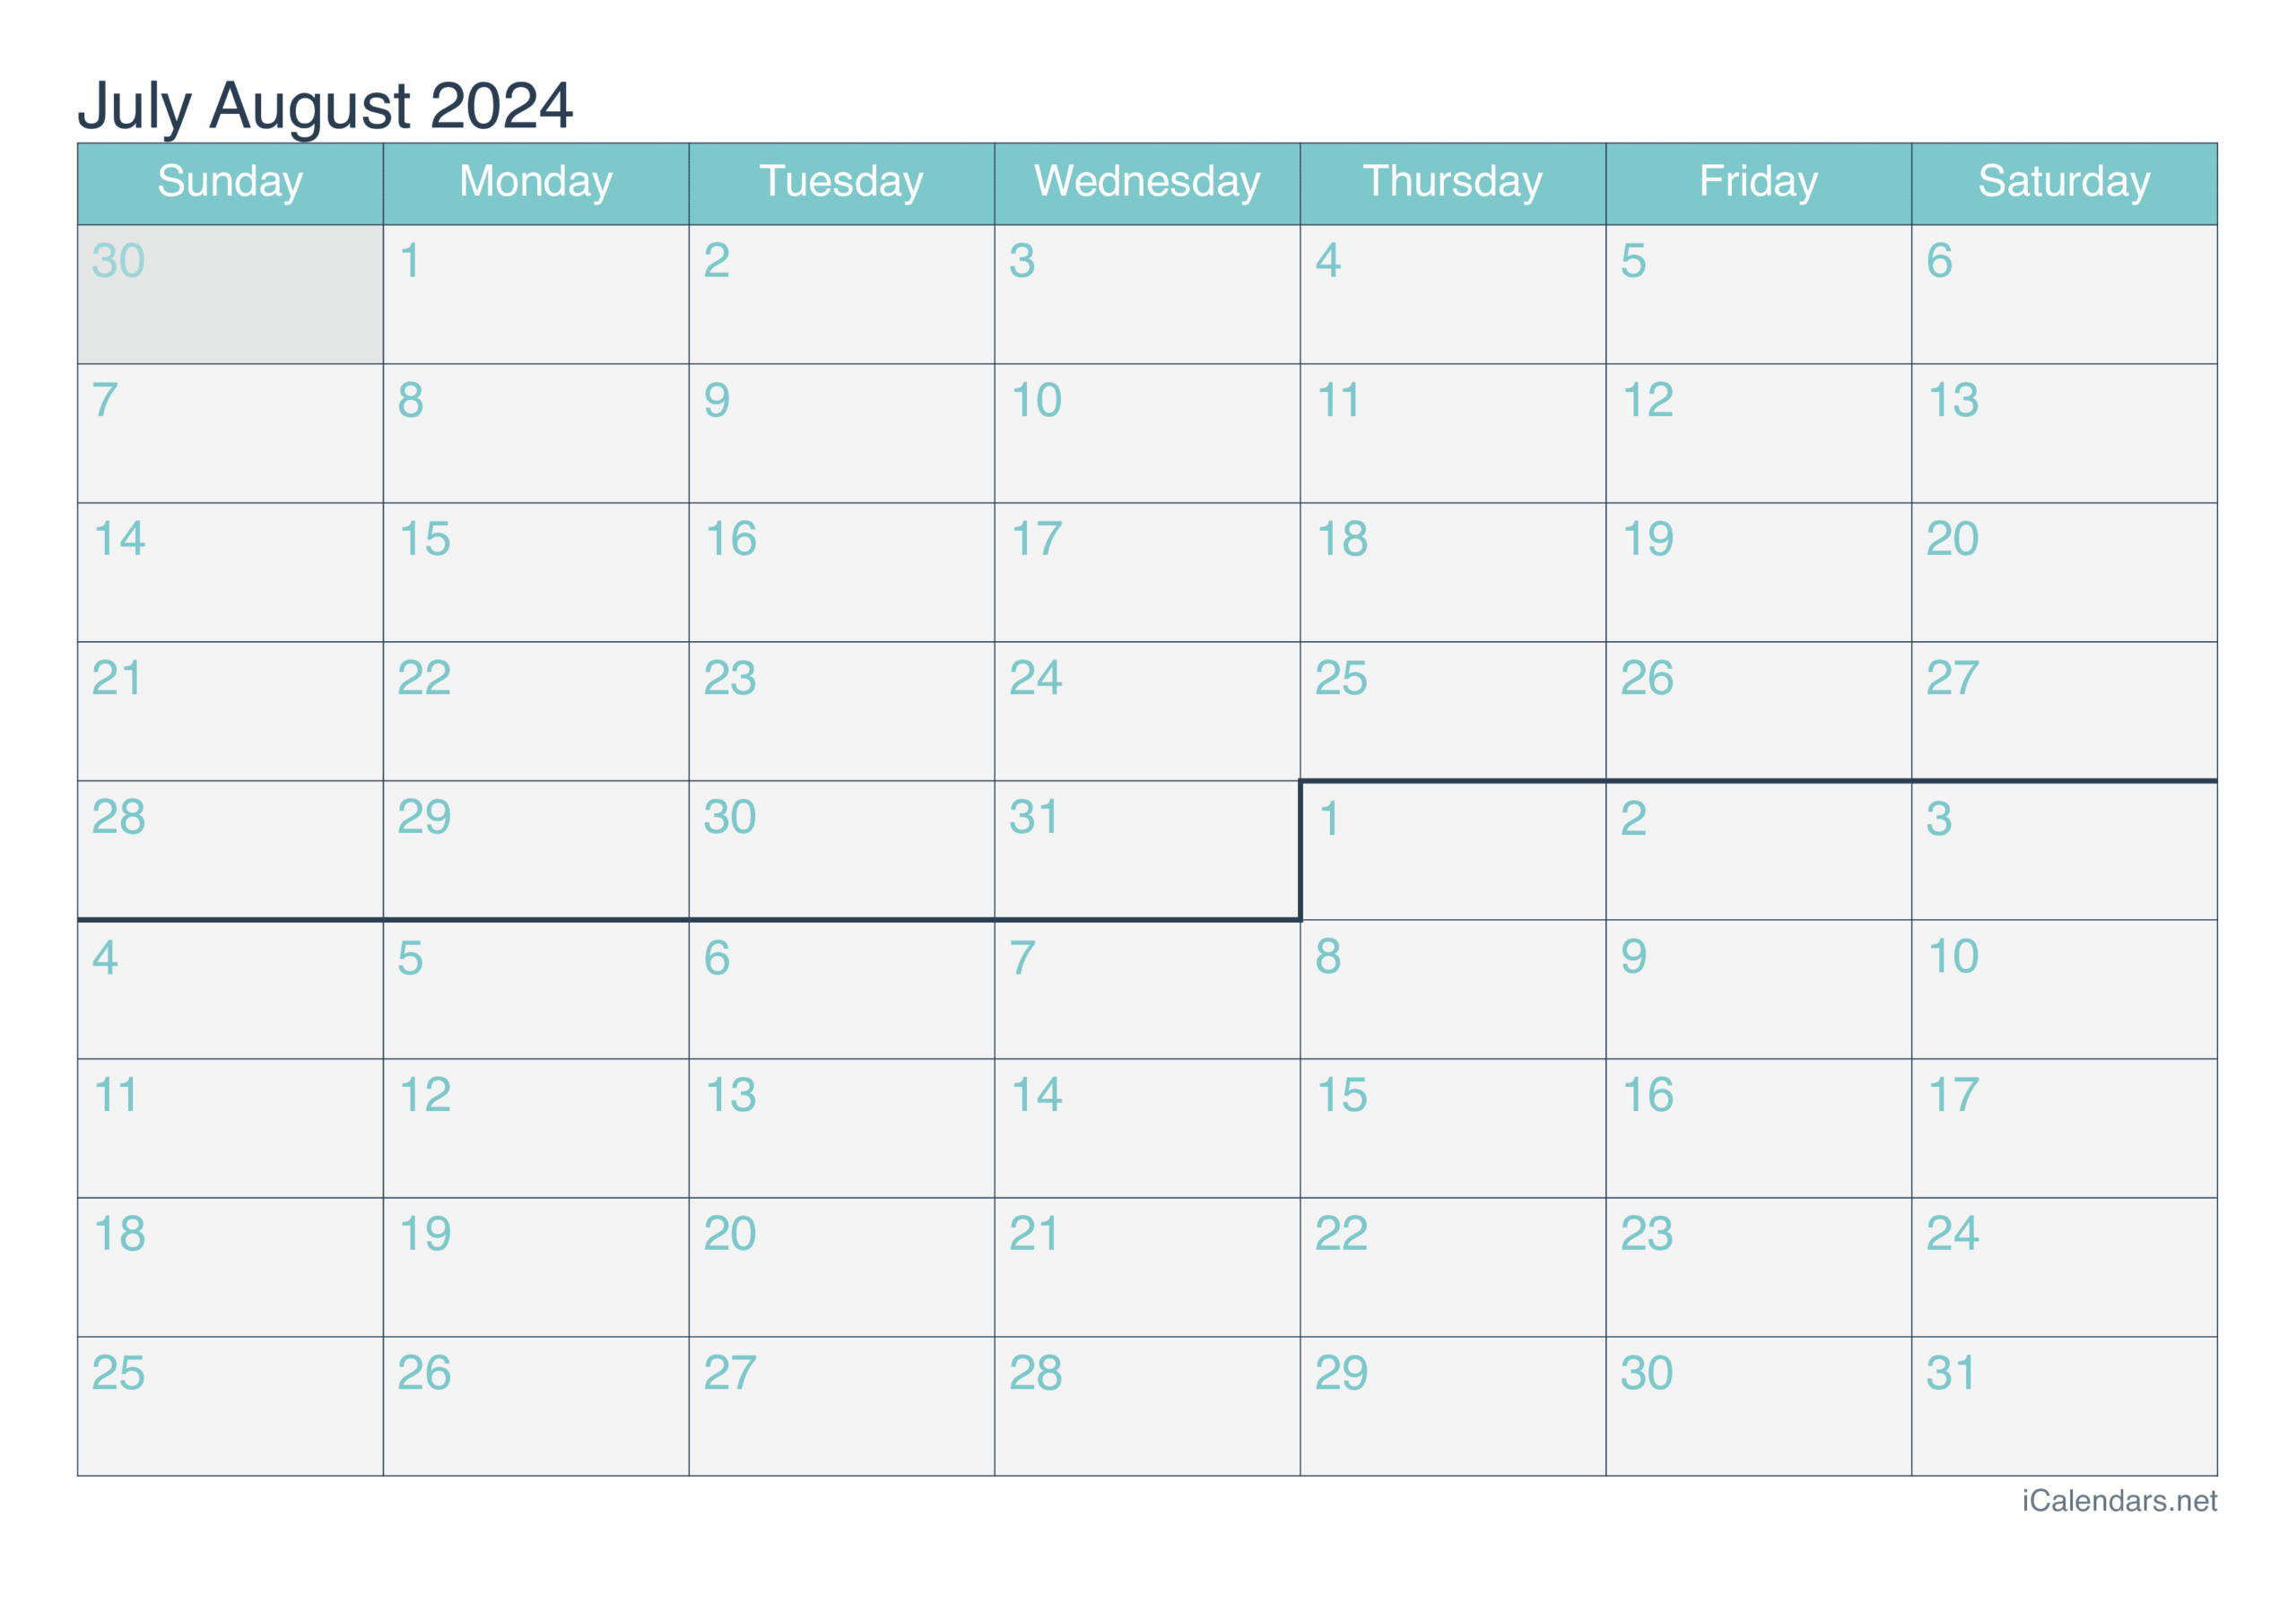 July And August 2024 Printable Calendar within Calendar of July and August 2024